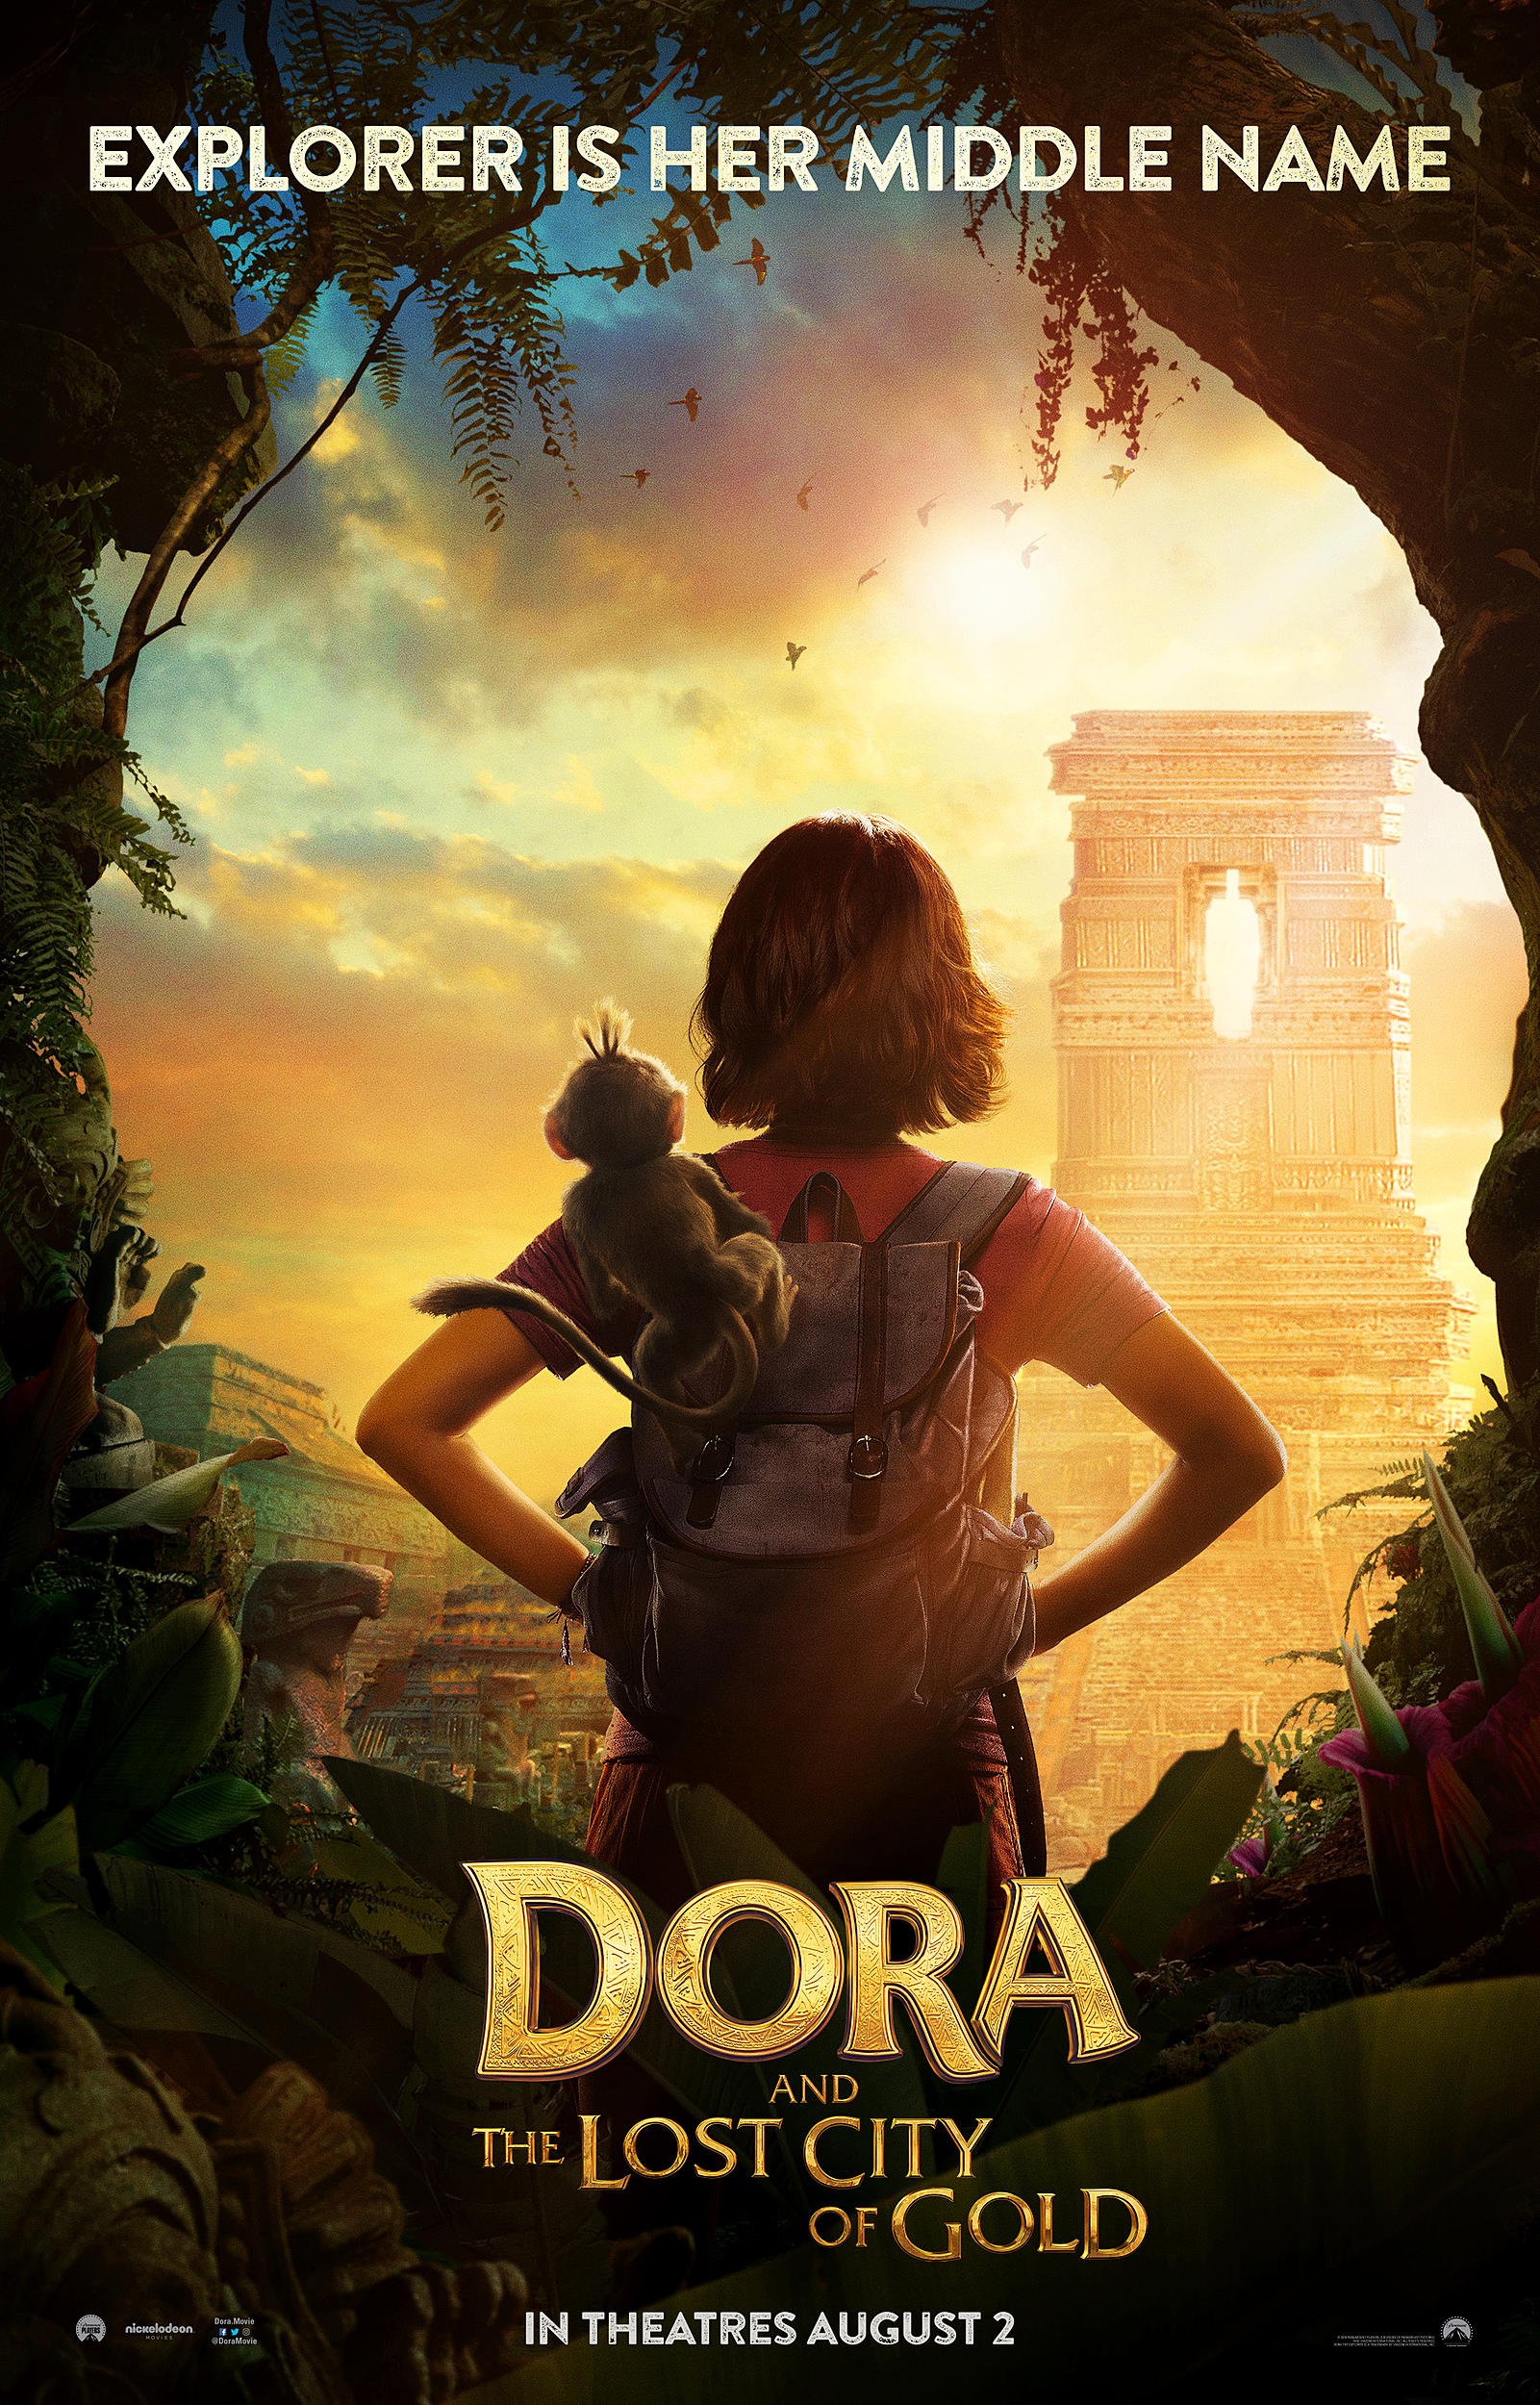 Dora All Grown Up Porn - The 'Dora the Explorer' Movie Has a Poster and an Official Title